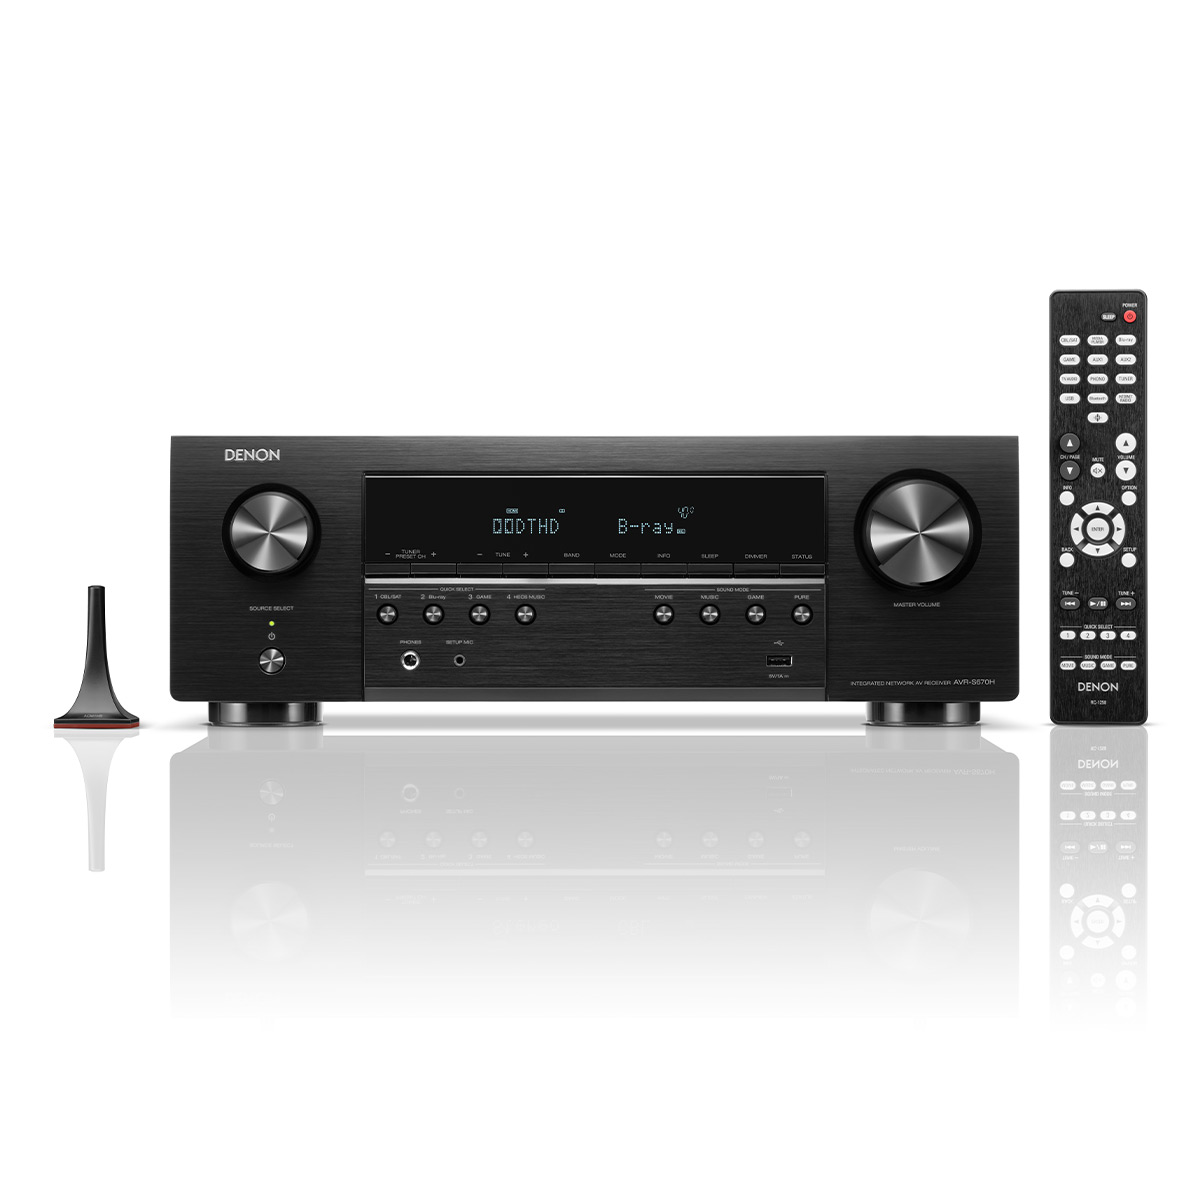 Denon AVR-S670H 5.2 Channel 8K Home Theater Receiver with Dolby TrueHD Audio, HDR10+, and HEOS Built-In - image 1 of 10